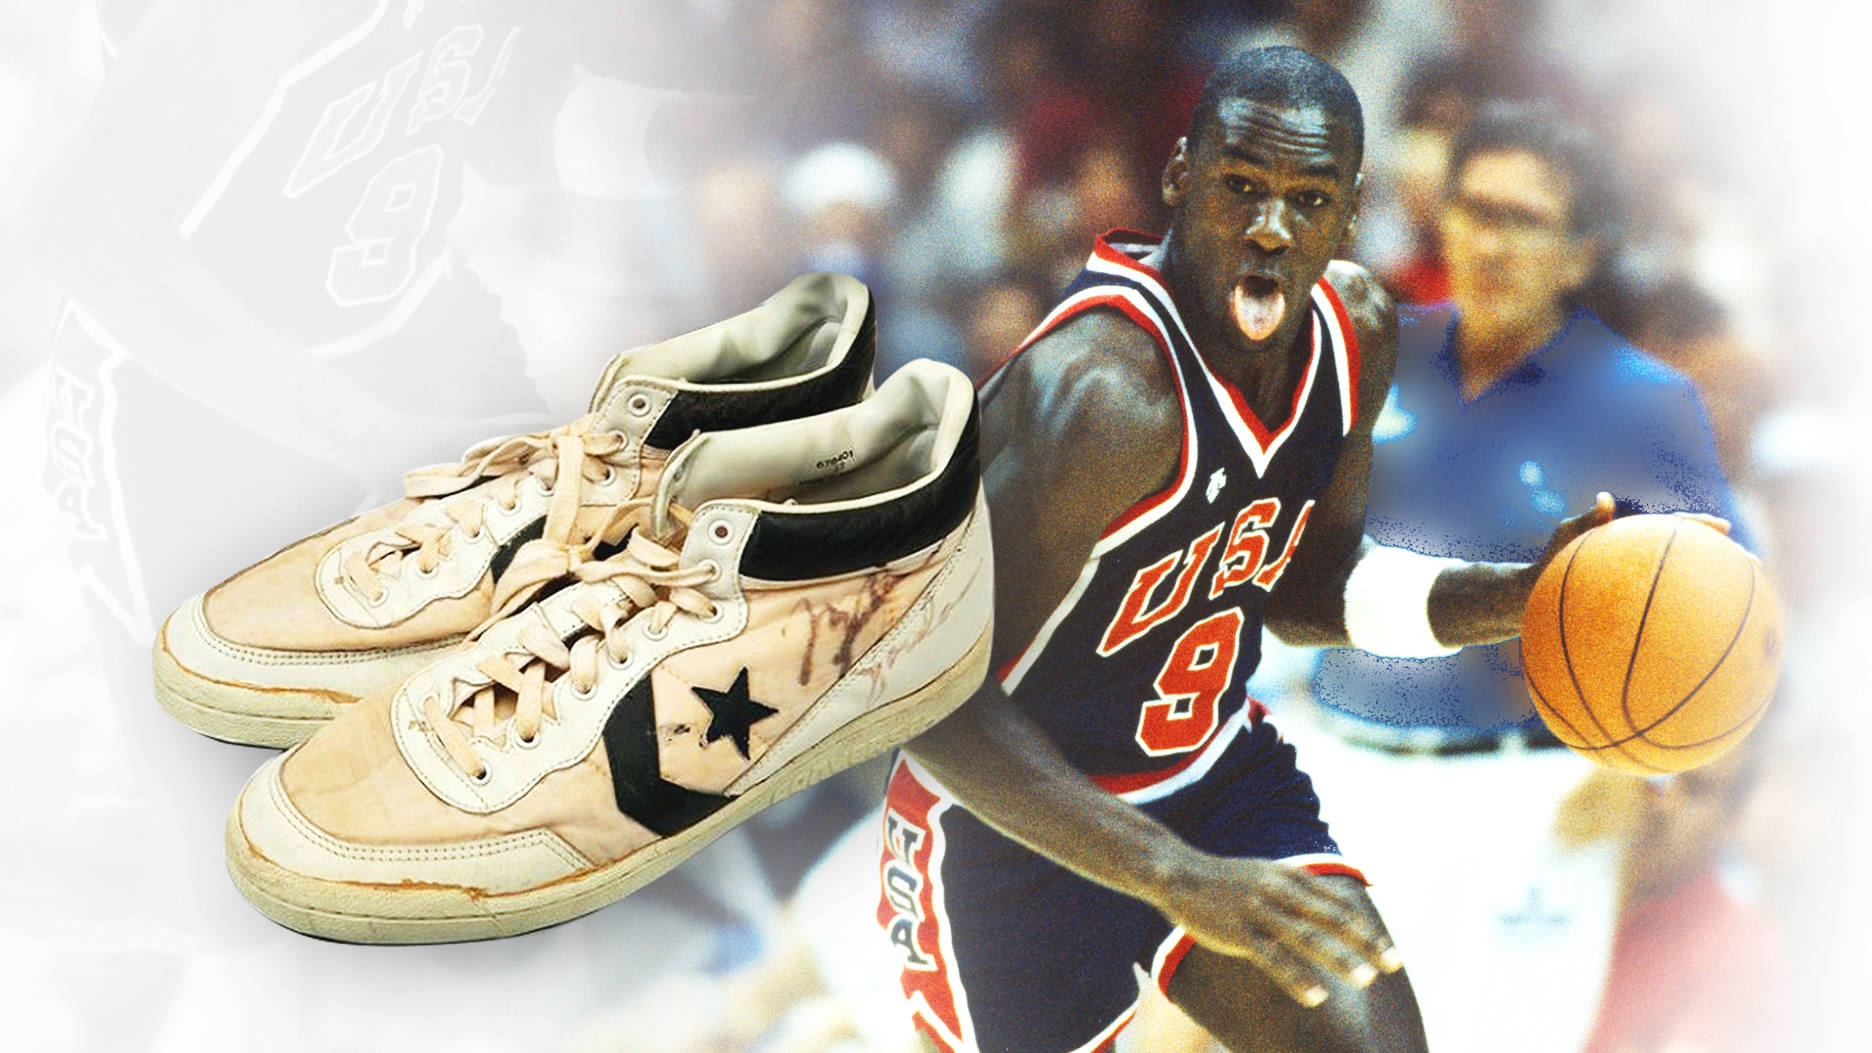 Michael Jordan's Olympic sneakers sold for record $190,373 - CGTN